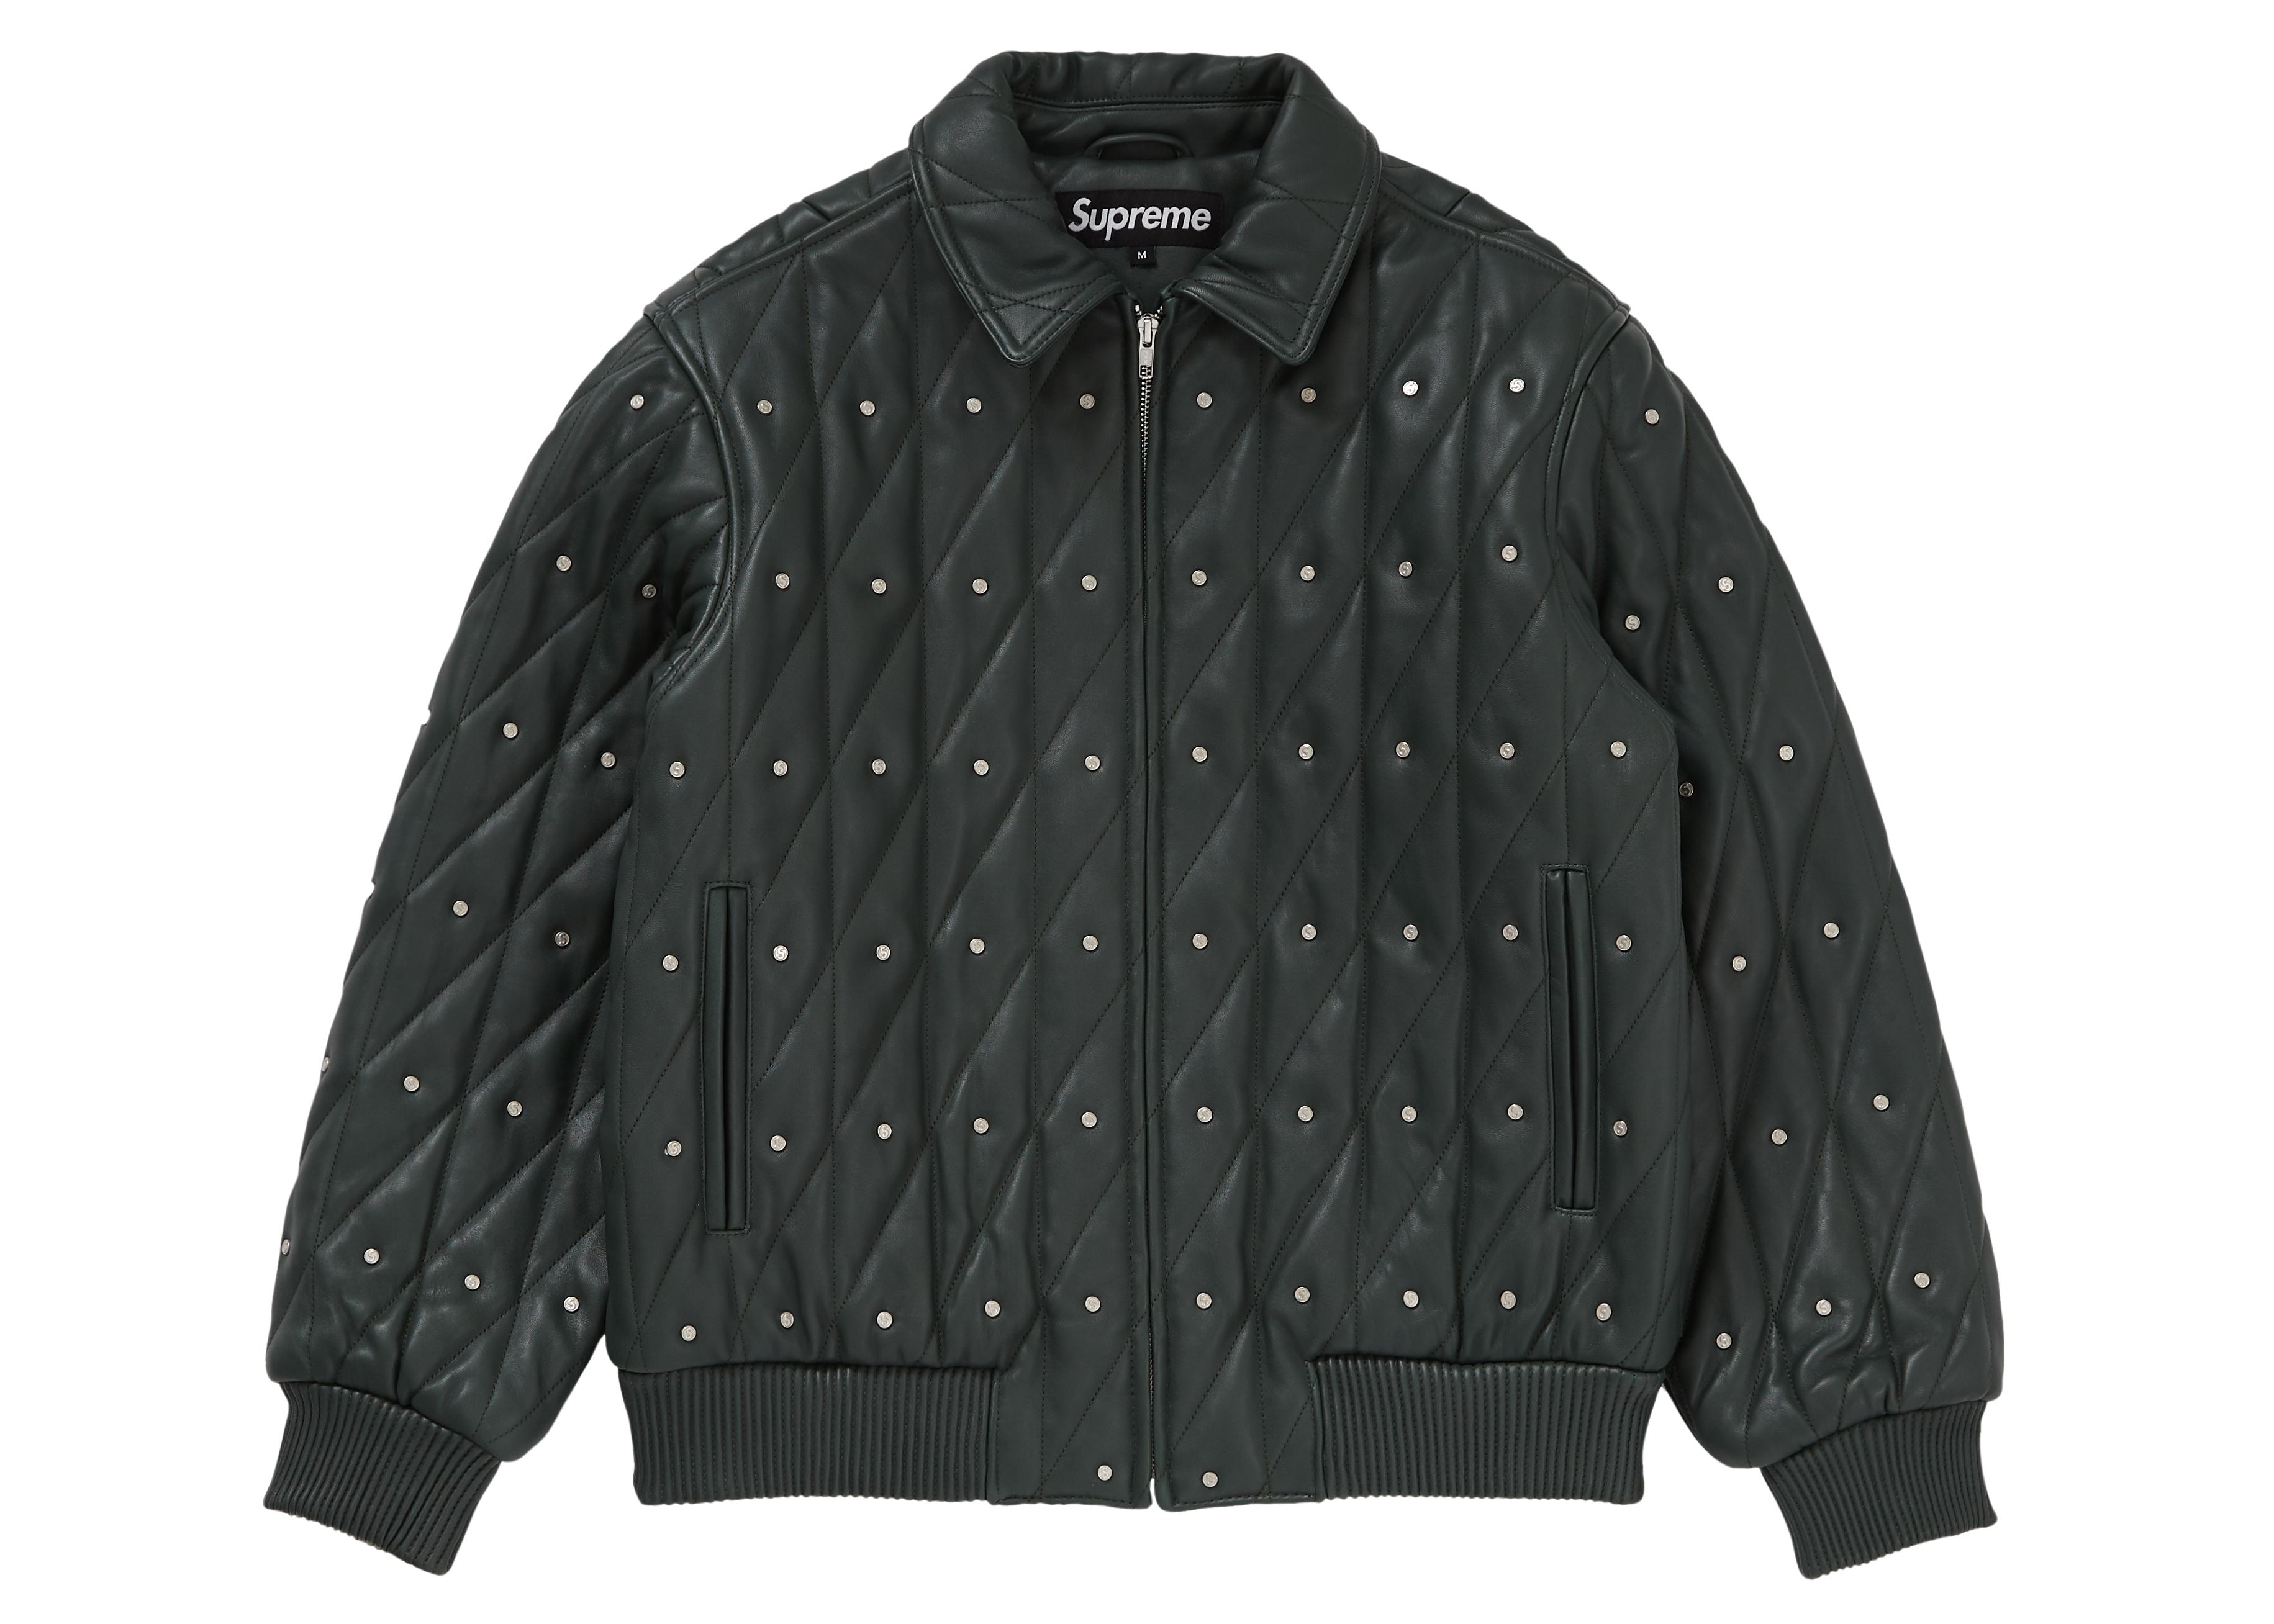 Lyst - Supreme Quilted Studded Leather Jacket Dark Green in Green for Men